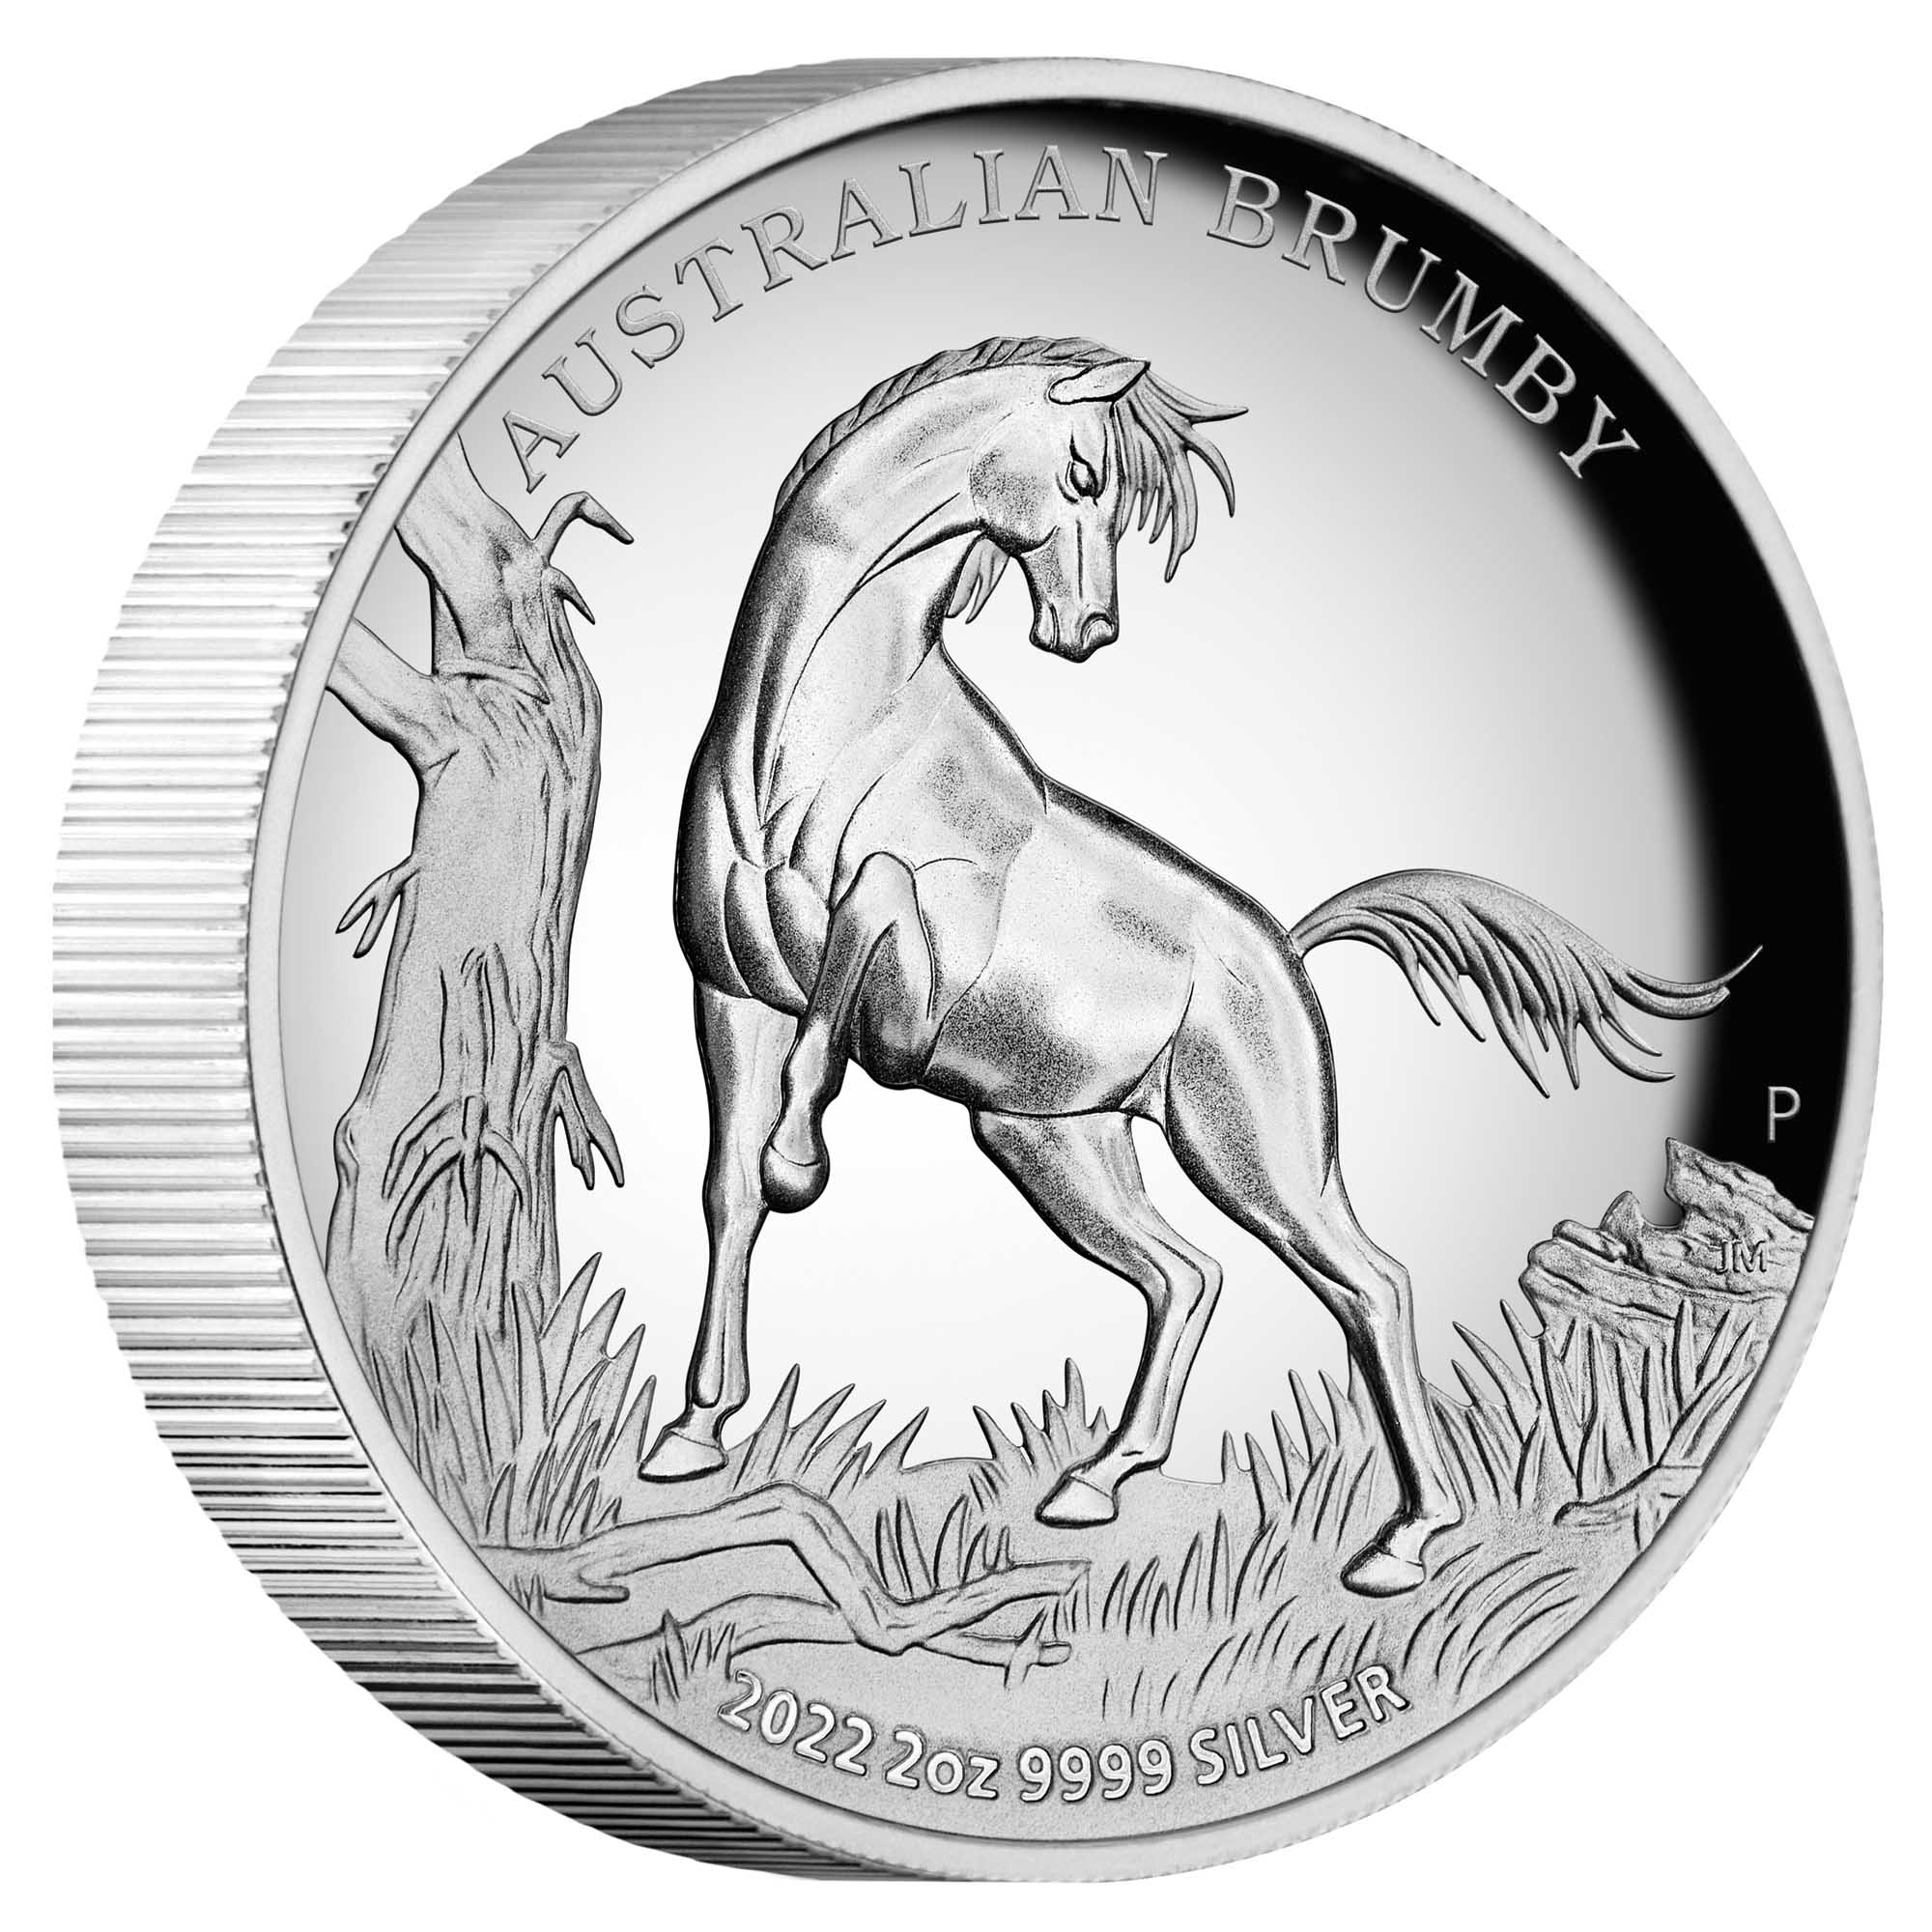 Australian Brumby 2022 2oz Silver Proof High Relief Coin